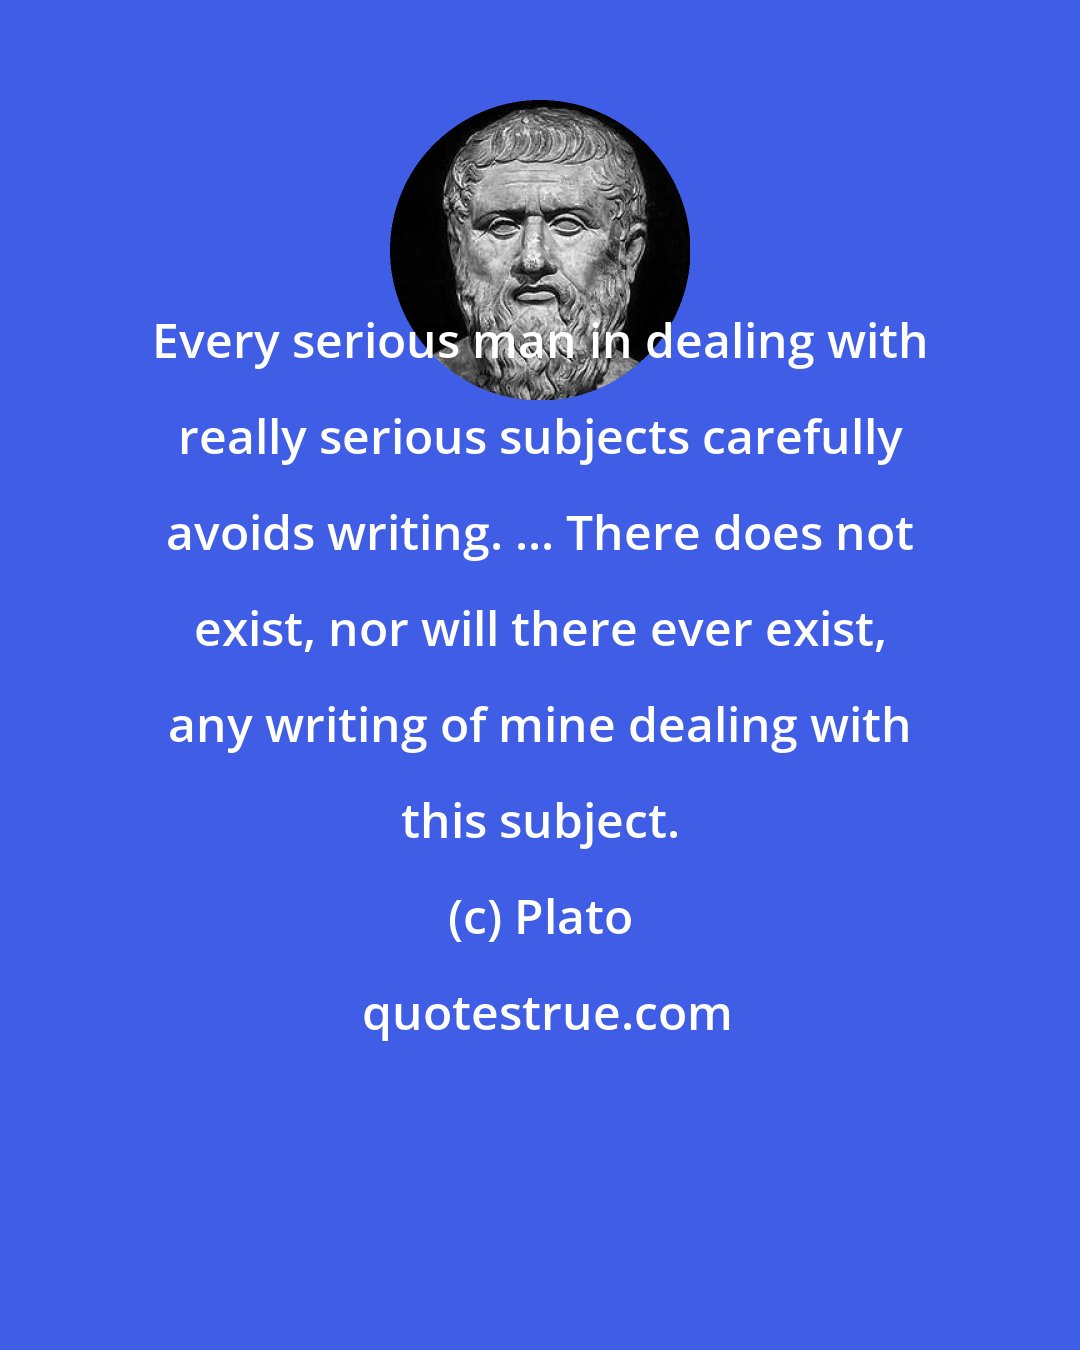 Plato: Every serious man in dealing with really serious subjects carefully avoids writing. ... There does not exist, nor will there ever exist, any writing of mine dealing with this subject.